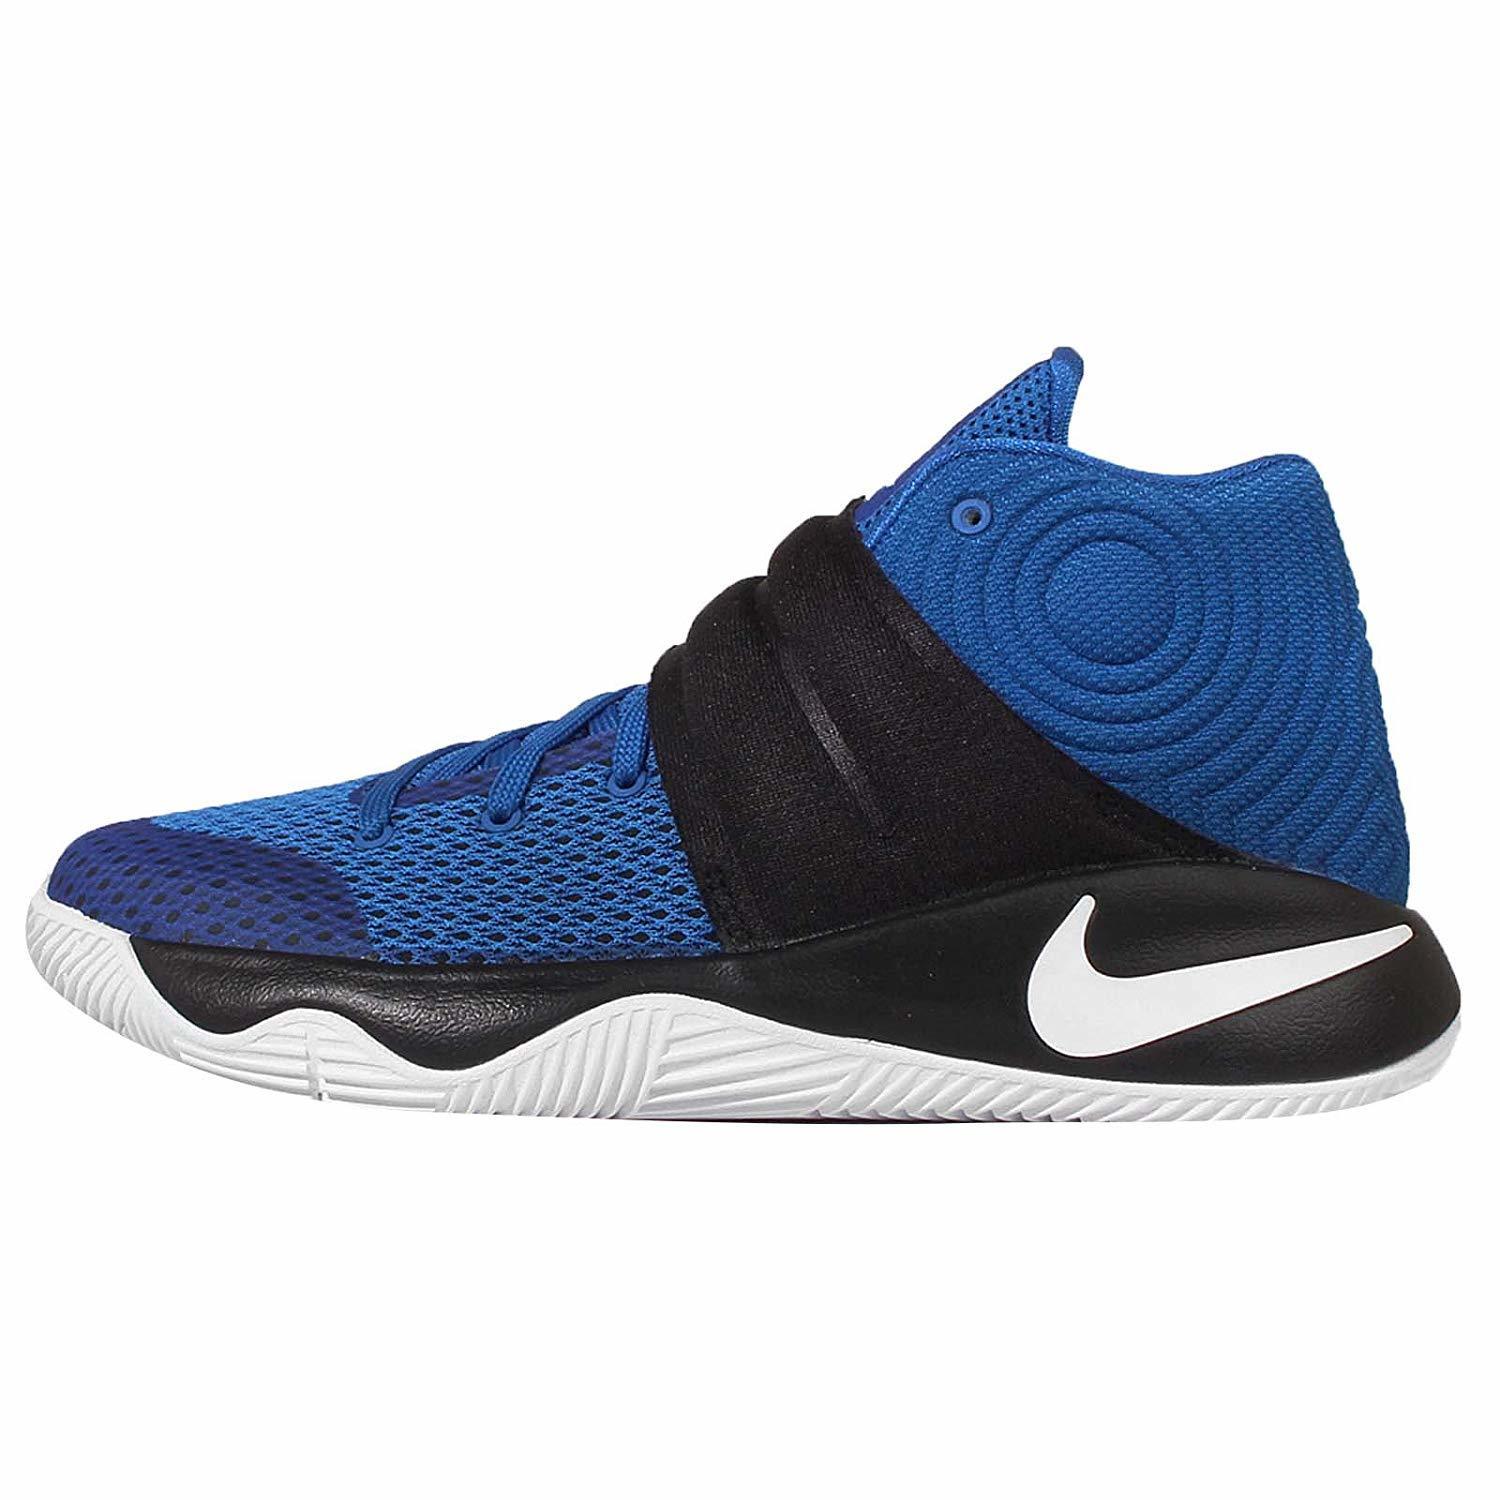 kyrie 2 basketball shoes